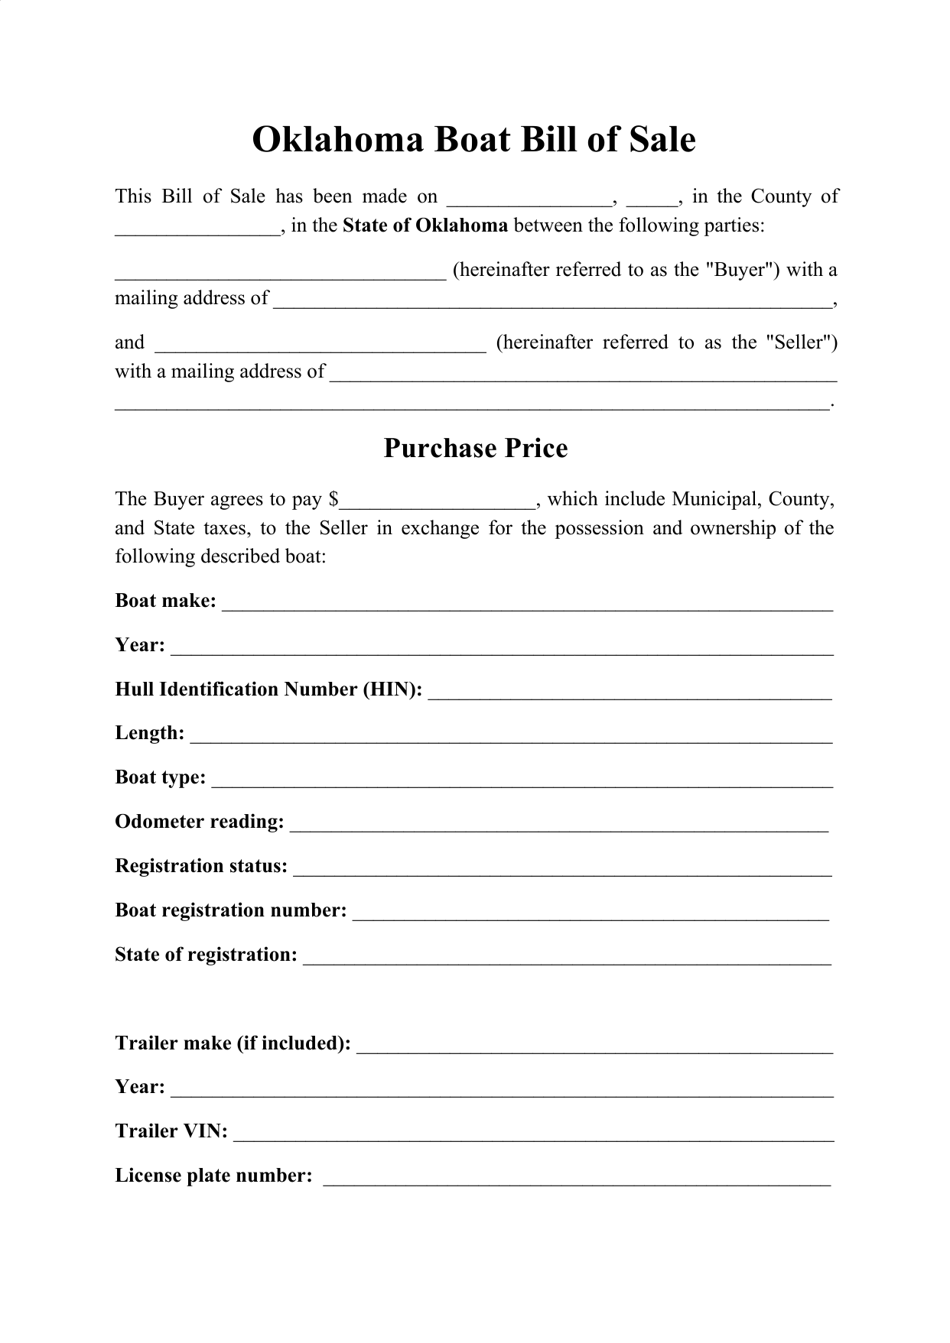 Boat Bill of Sale Form - Oklahoma, Page 1